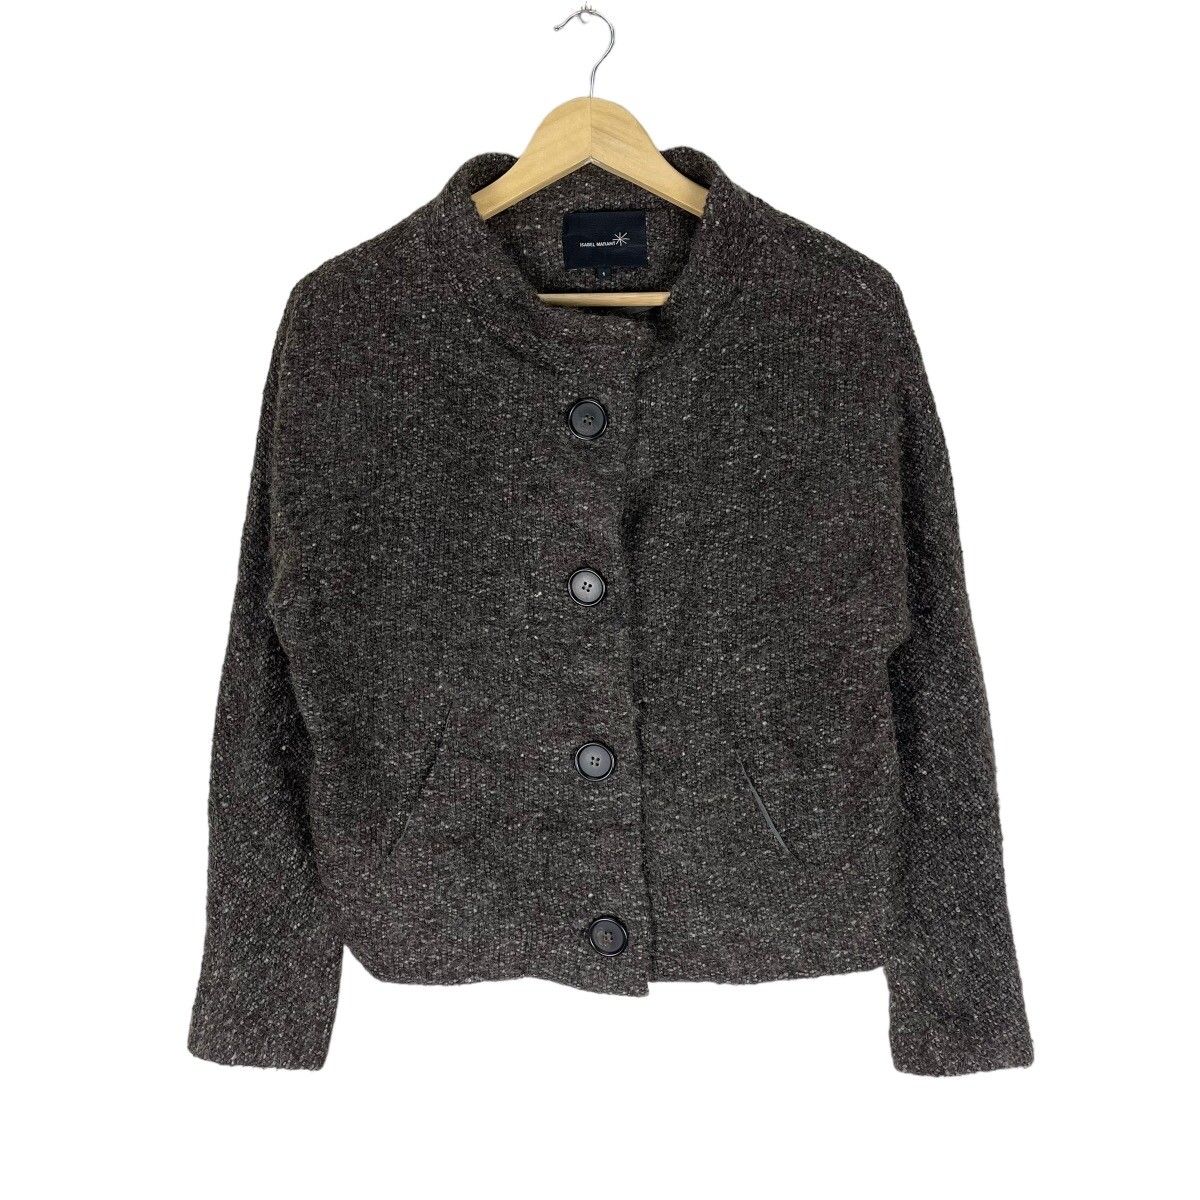 🌟ISABEL MARANT MOHAIR CROPPED BUTTON JACKET - 1